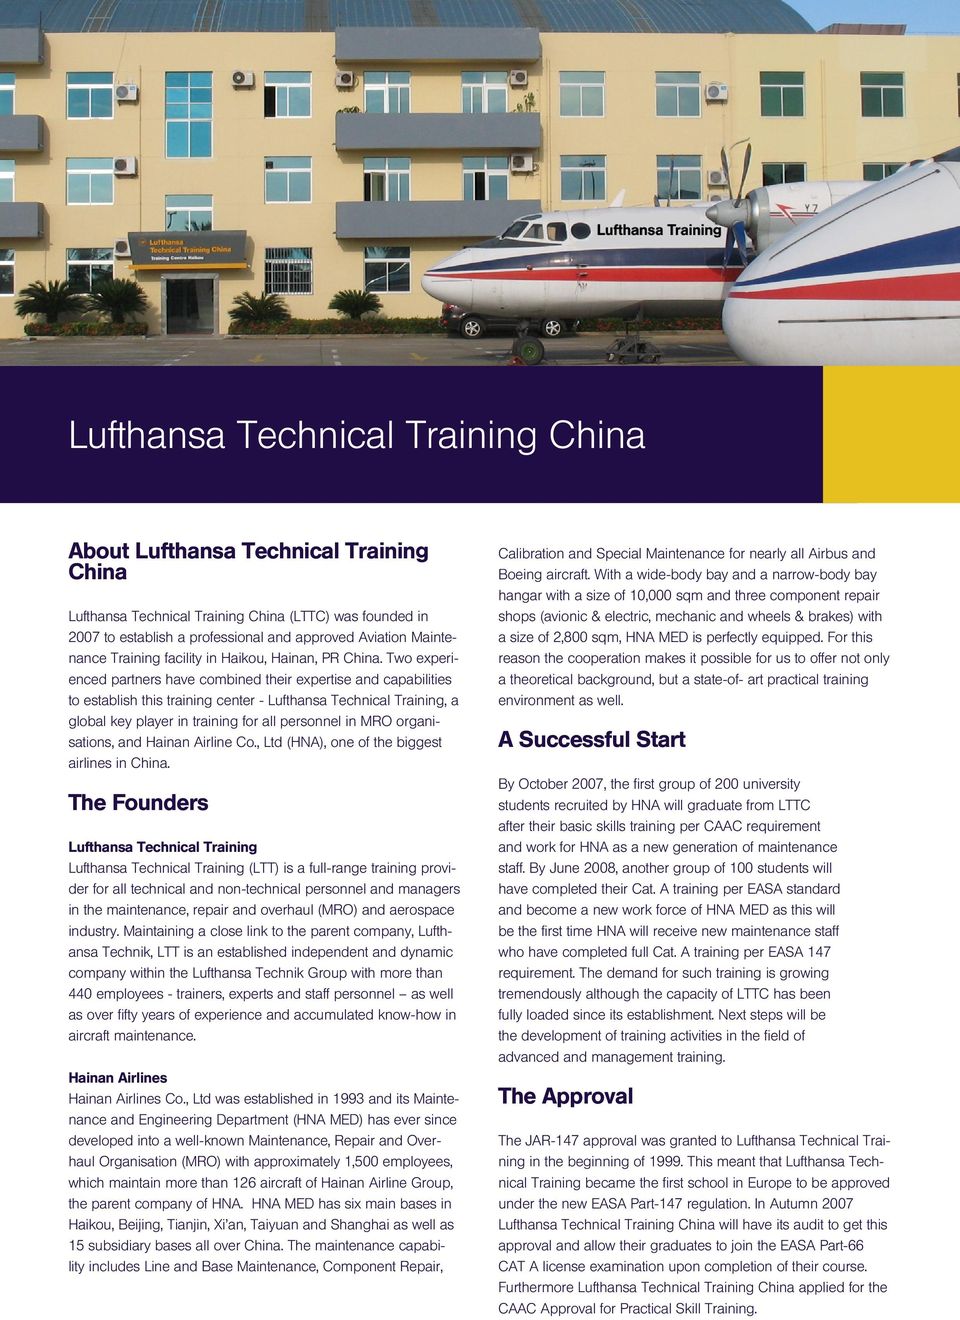 Two experienced partners have combined their expertise and capabilities to establish this training center - Lufthansa Technical Training, a global key player in training for all personnel in MRO